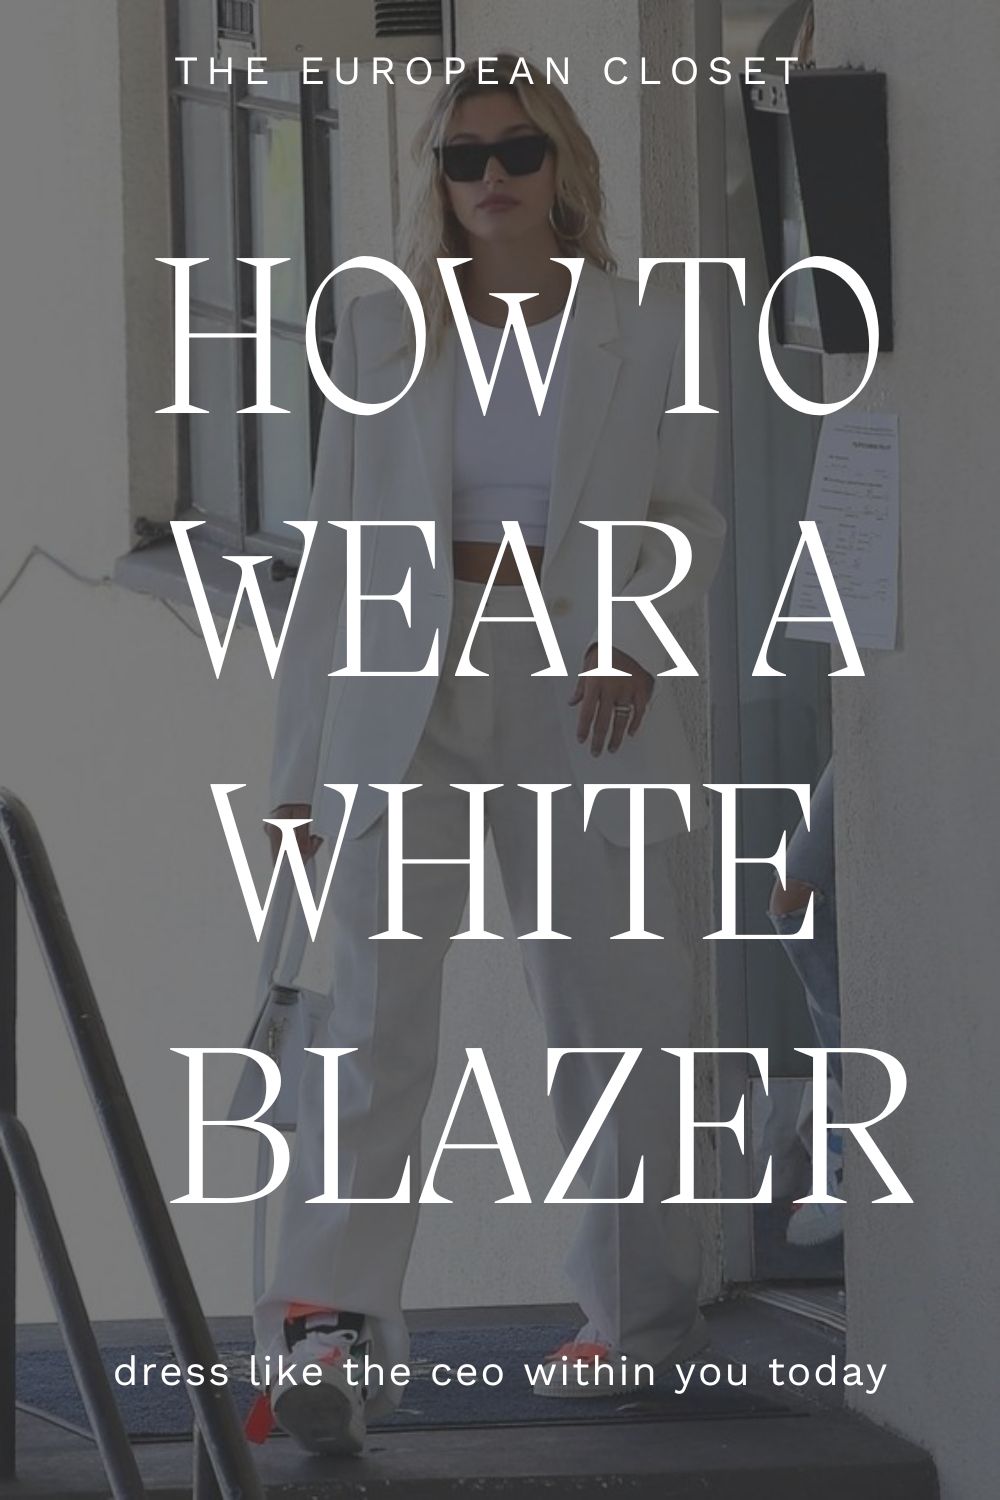 Are you unsure on how to style your favorite white blazer? worry not as I'm here to share with you how to wear a white blazer and look like the CEO within you.